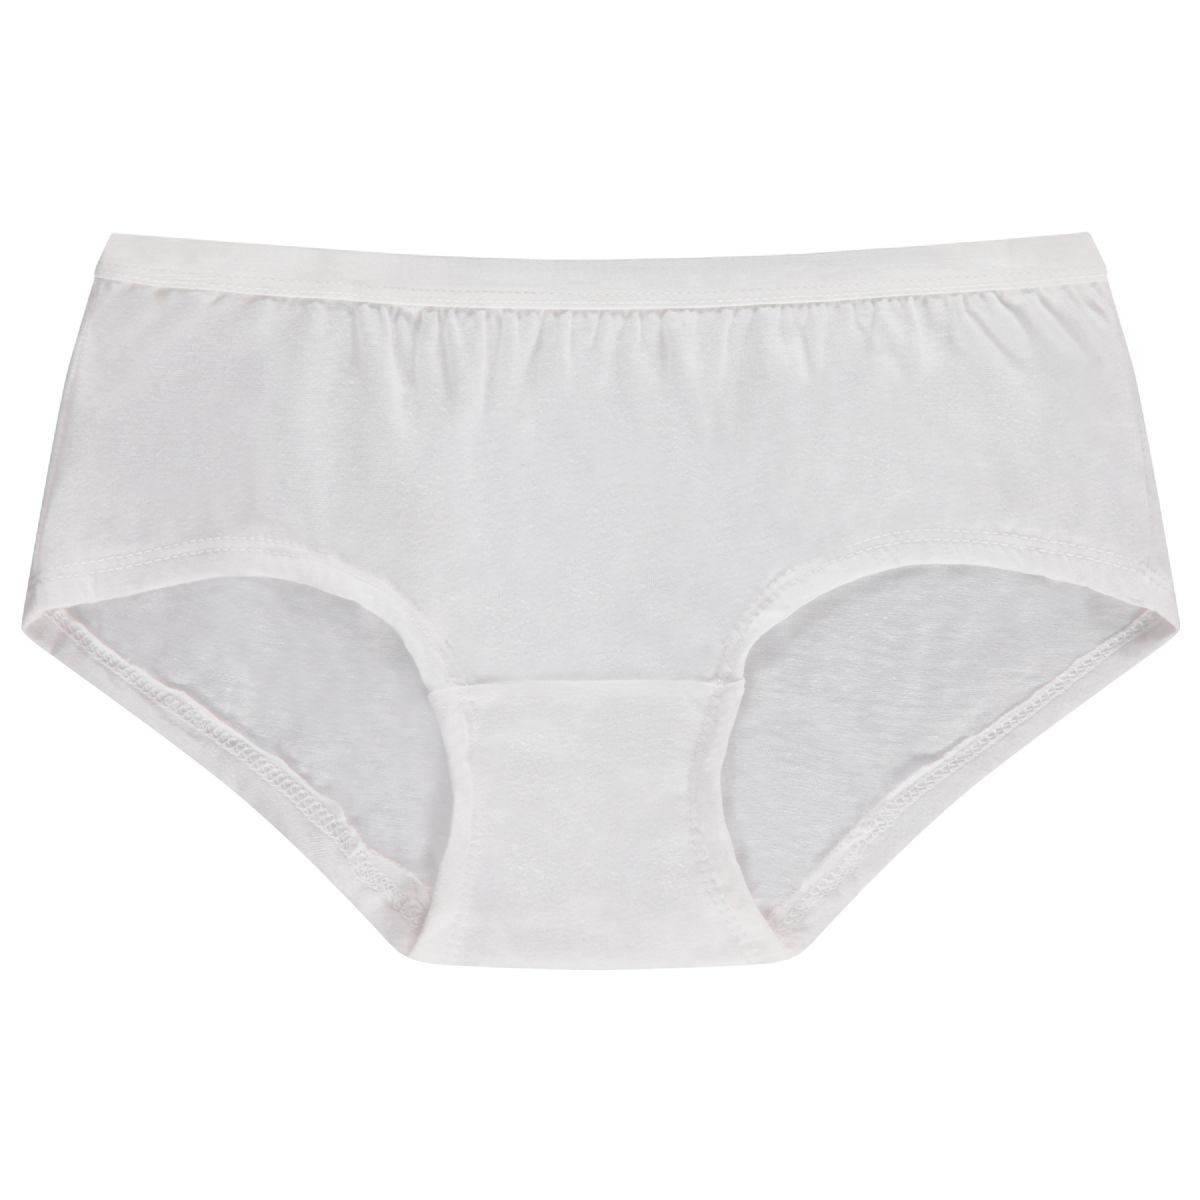 48 Pieces Yacht & Smith Womens White Underwear, Panties In Bulk, 95% Cotton  - Size xs - Womens Panties & Underwear - at 